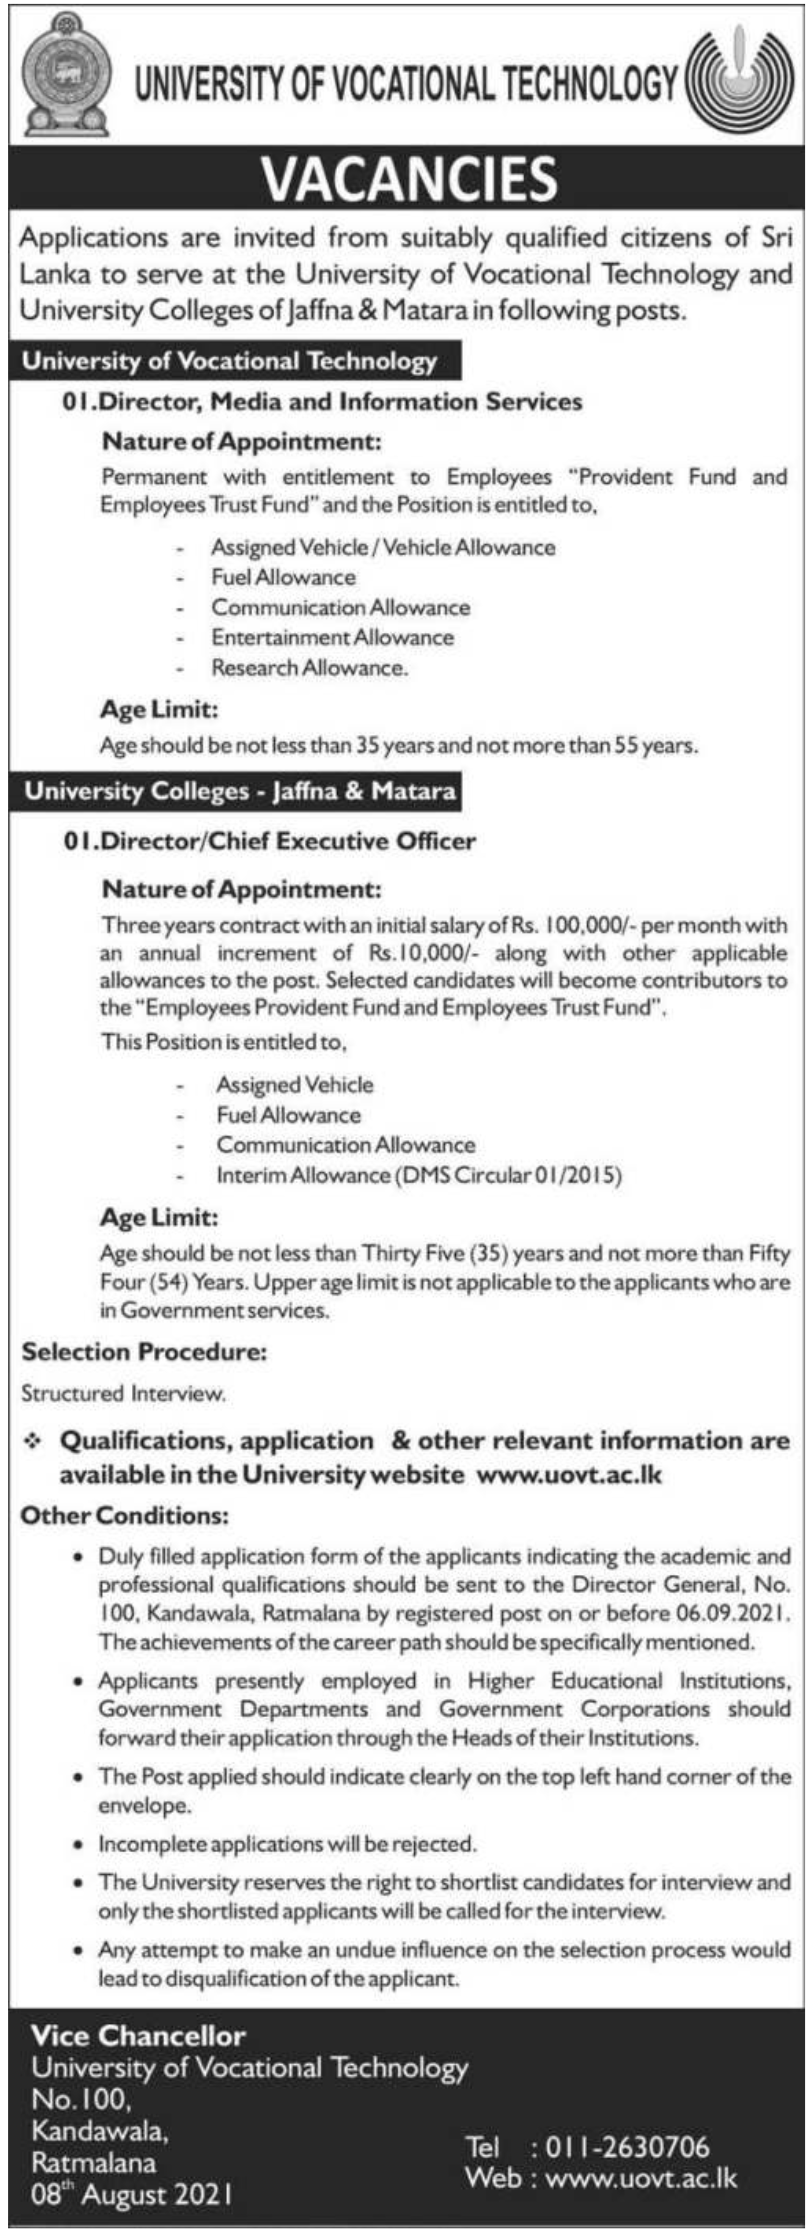 Director (Media and Information Services), Director / Chief Executive Officer 2021 – University of Vocational Technology